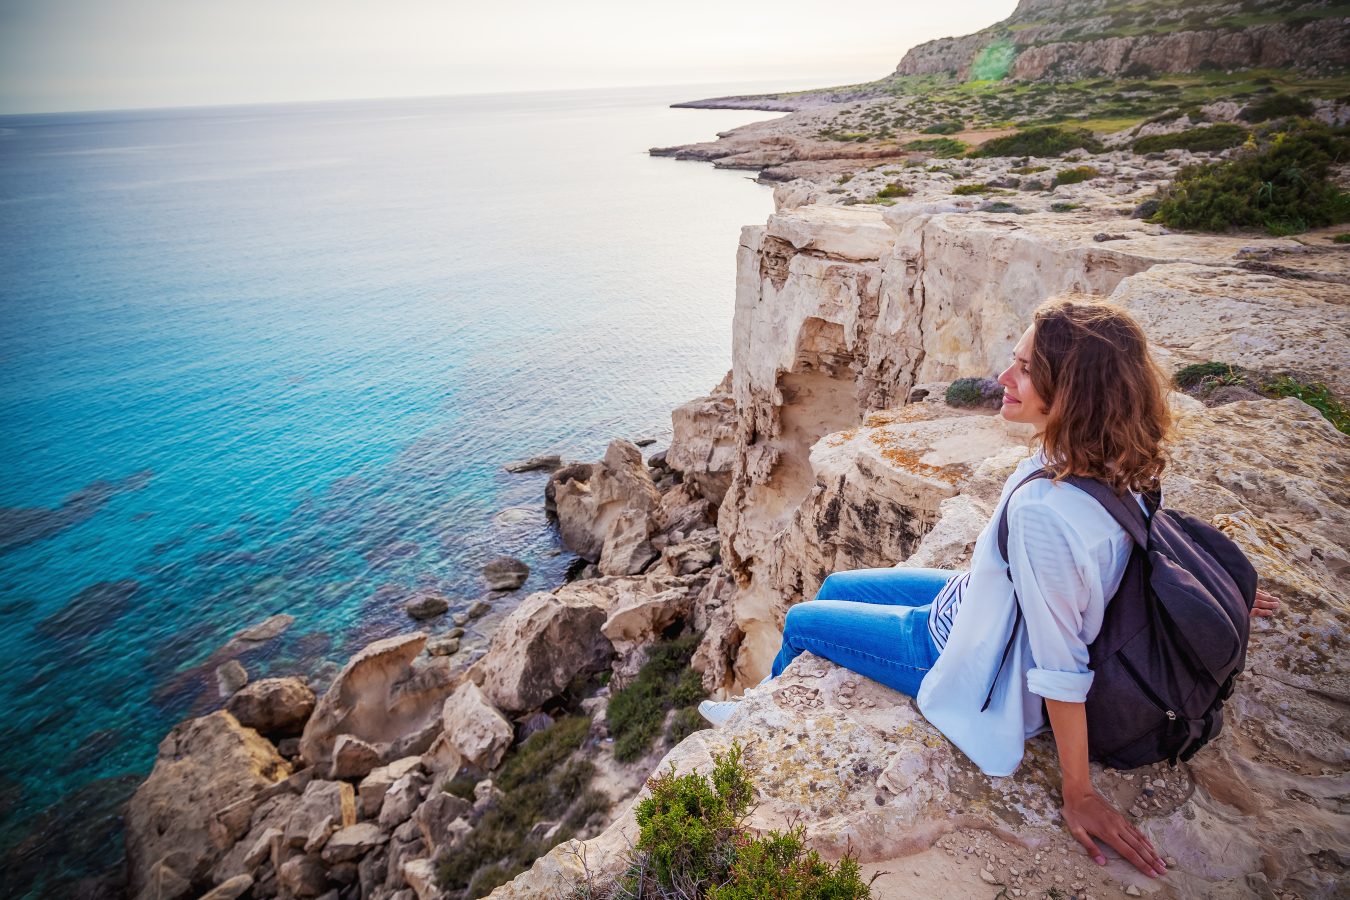 Young woman sits on rocky cliff and watches the ocean in Greece, a popular destination for cheap travel.